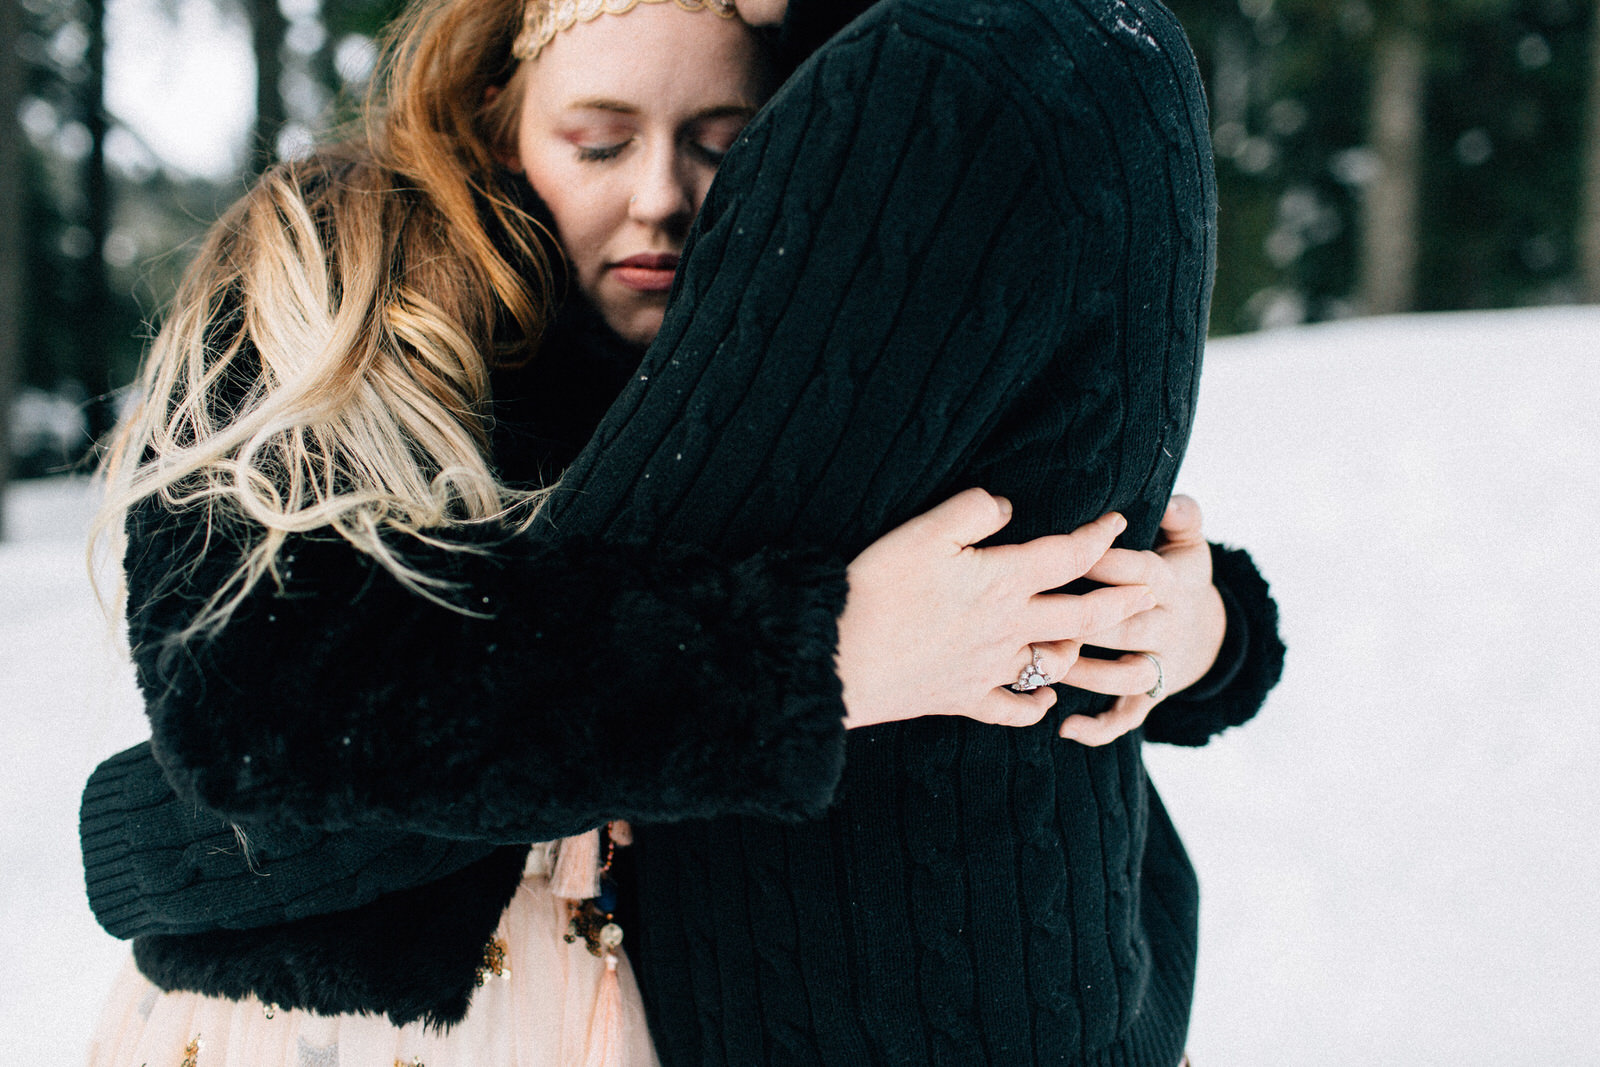 Snoqualmie Pass fuck yeah weddings engagement session snow mountains kendall shea feminist photographer